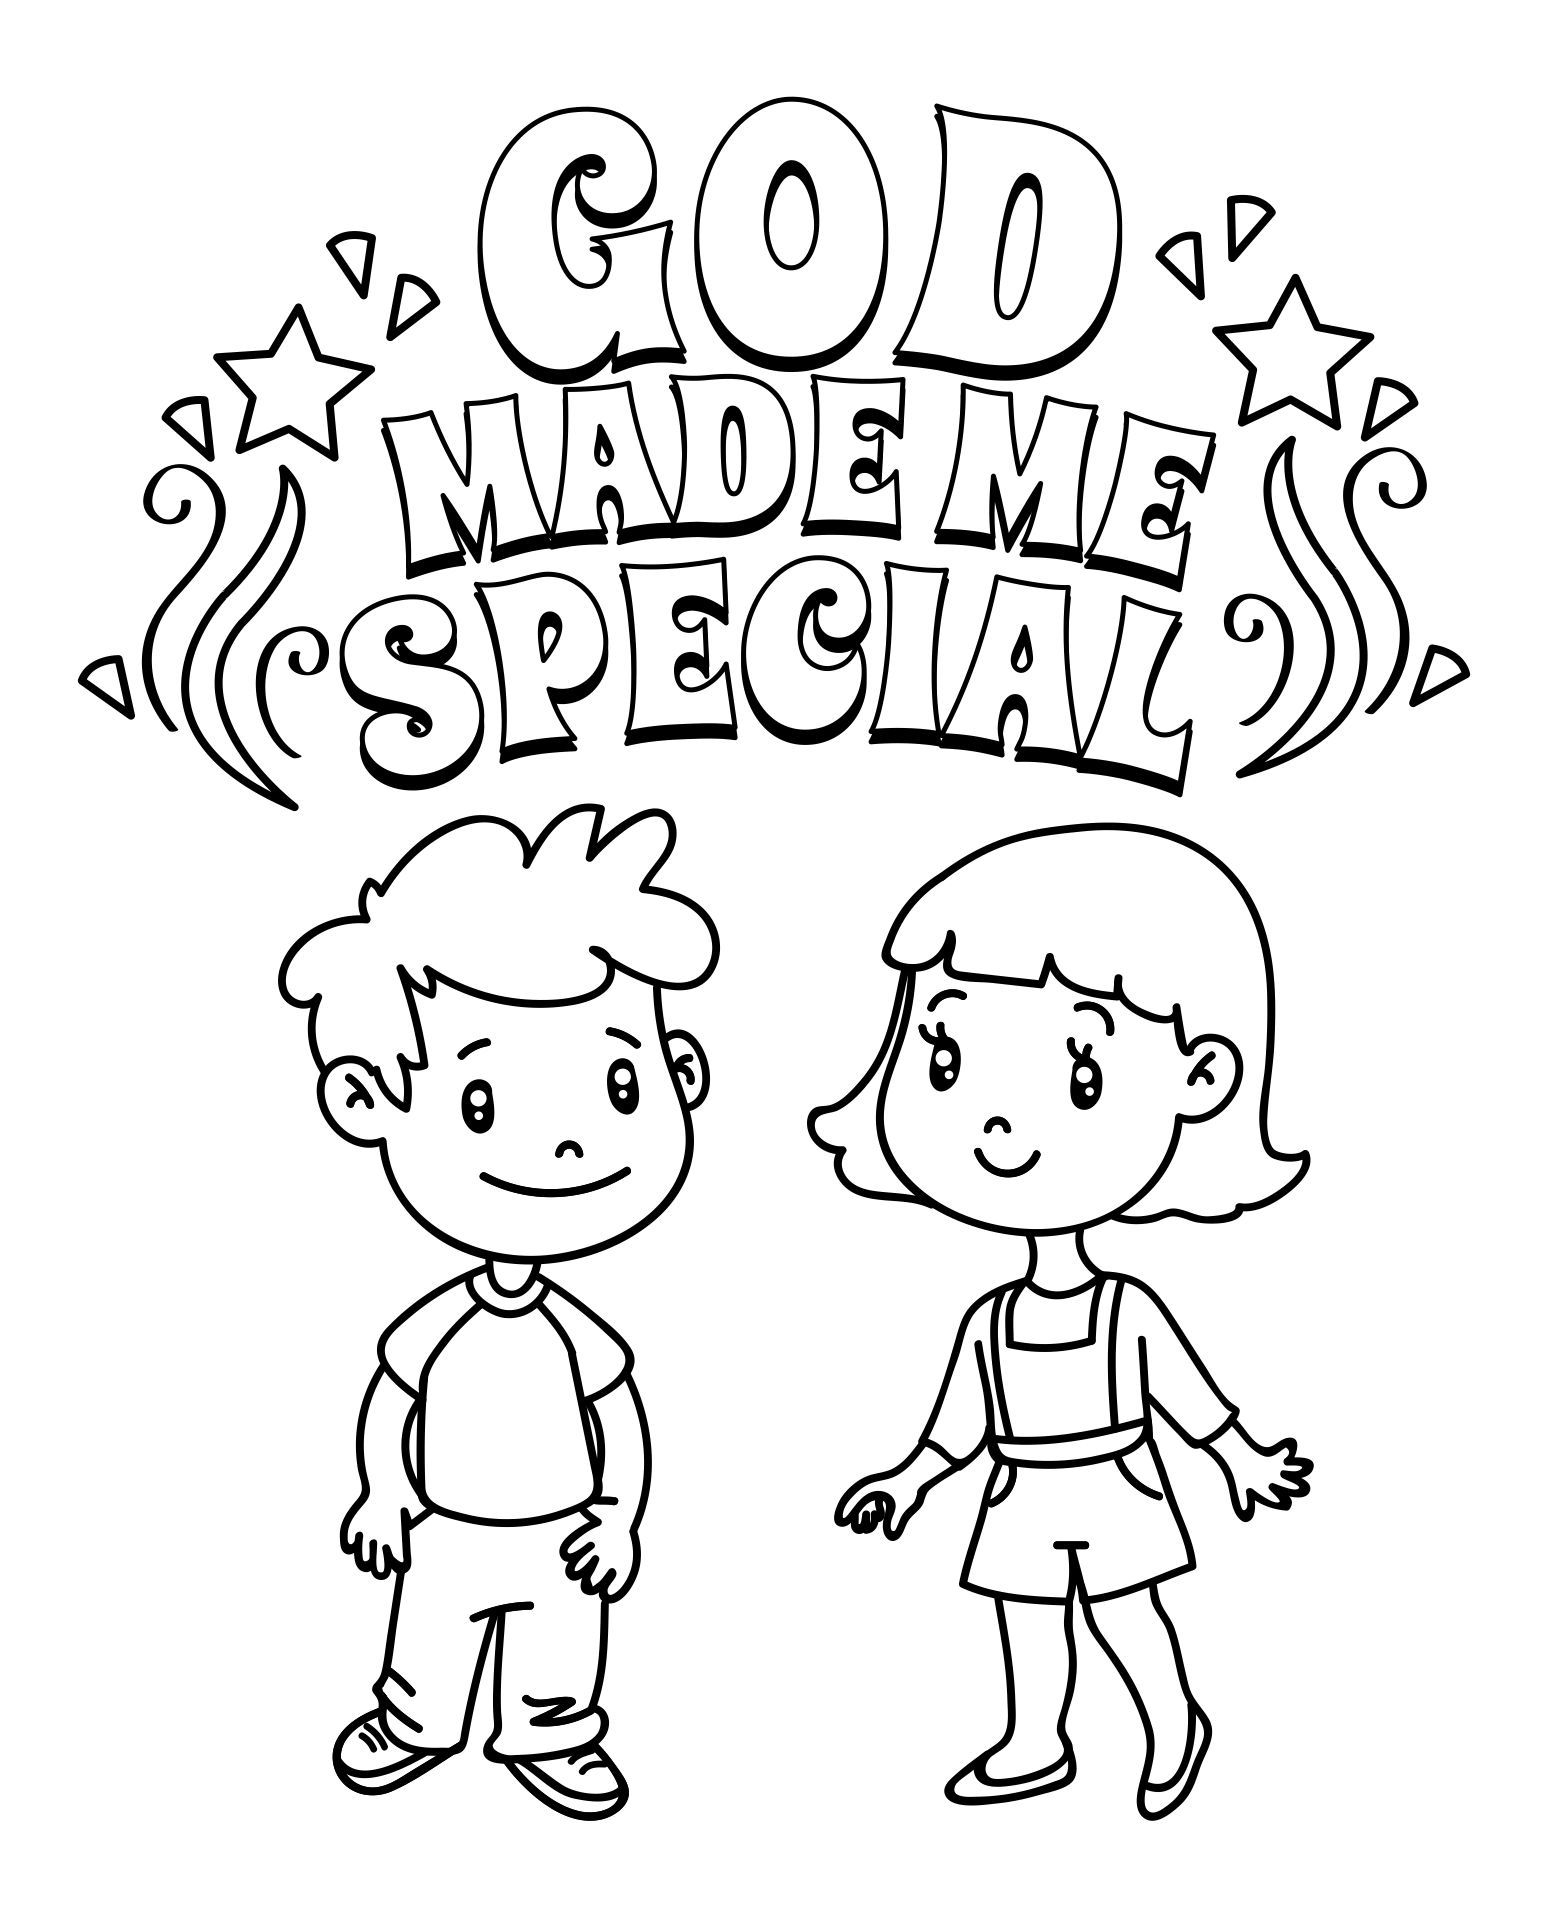 God Created Me Coloring Page Printable Sunday School Coloring Pages Preschool Coloring Pages Preschool Bible Lessons